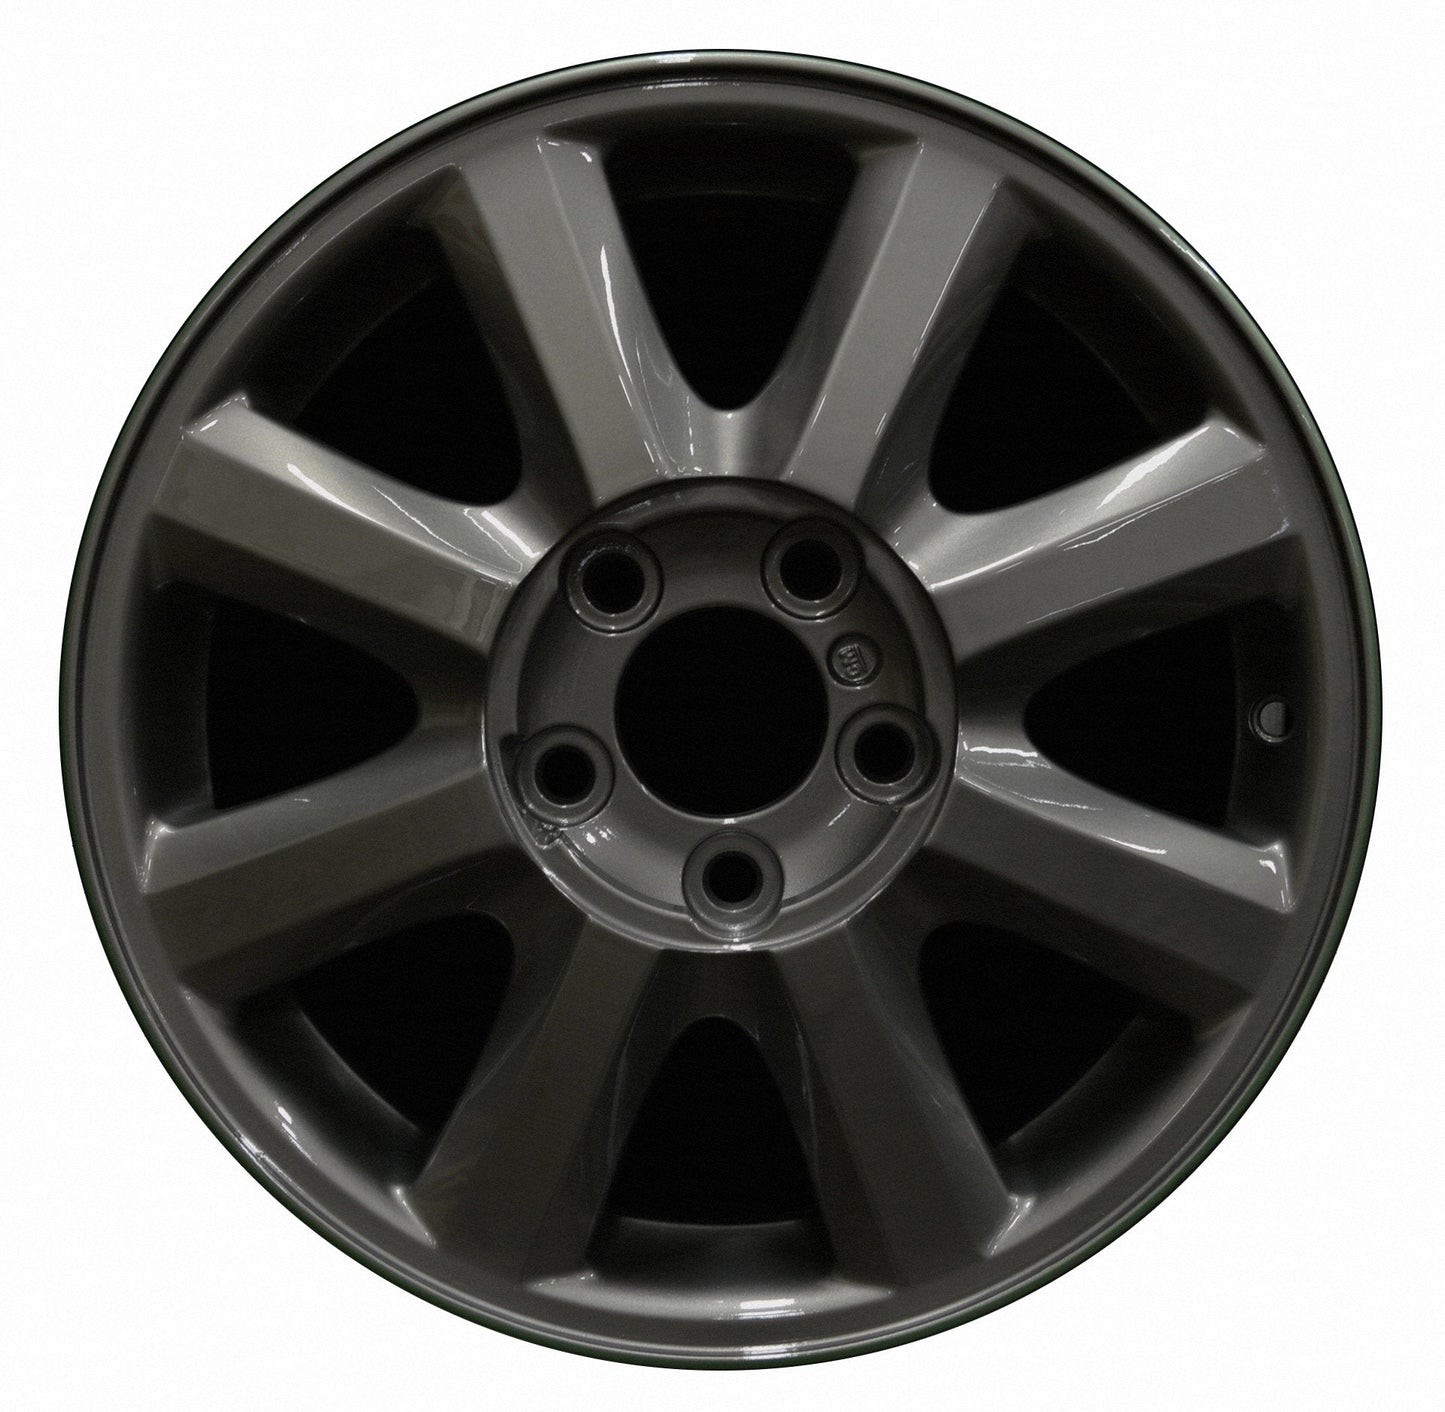 Buick LaCrosse  2005, 2006, 2007, 2008, 2009 Factory OEM Car Wheel Size 16x6.5 Alloy WAO.4056.LC22.FF